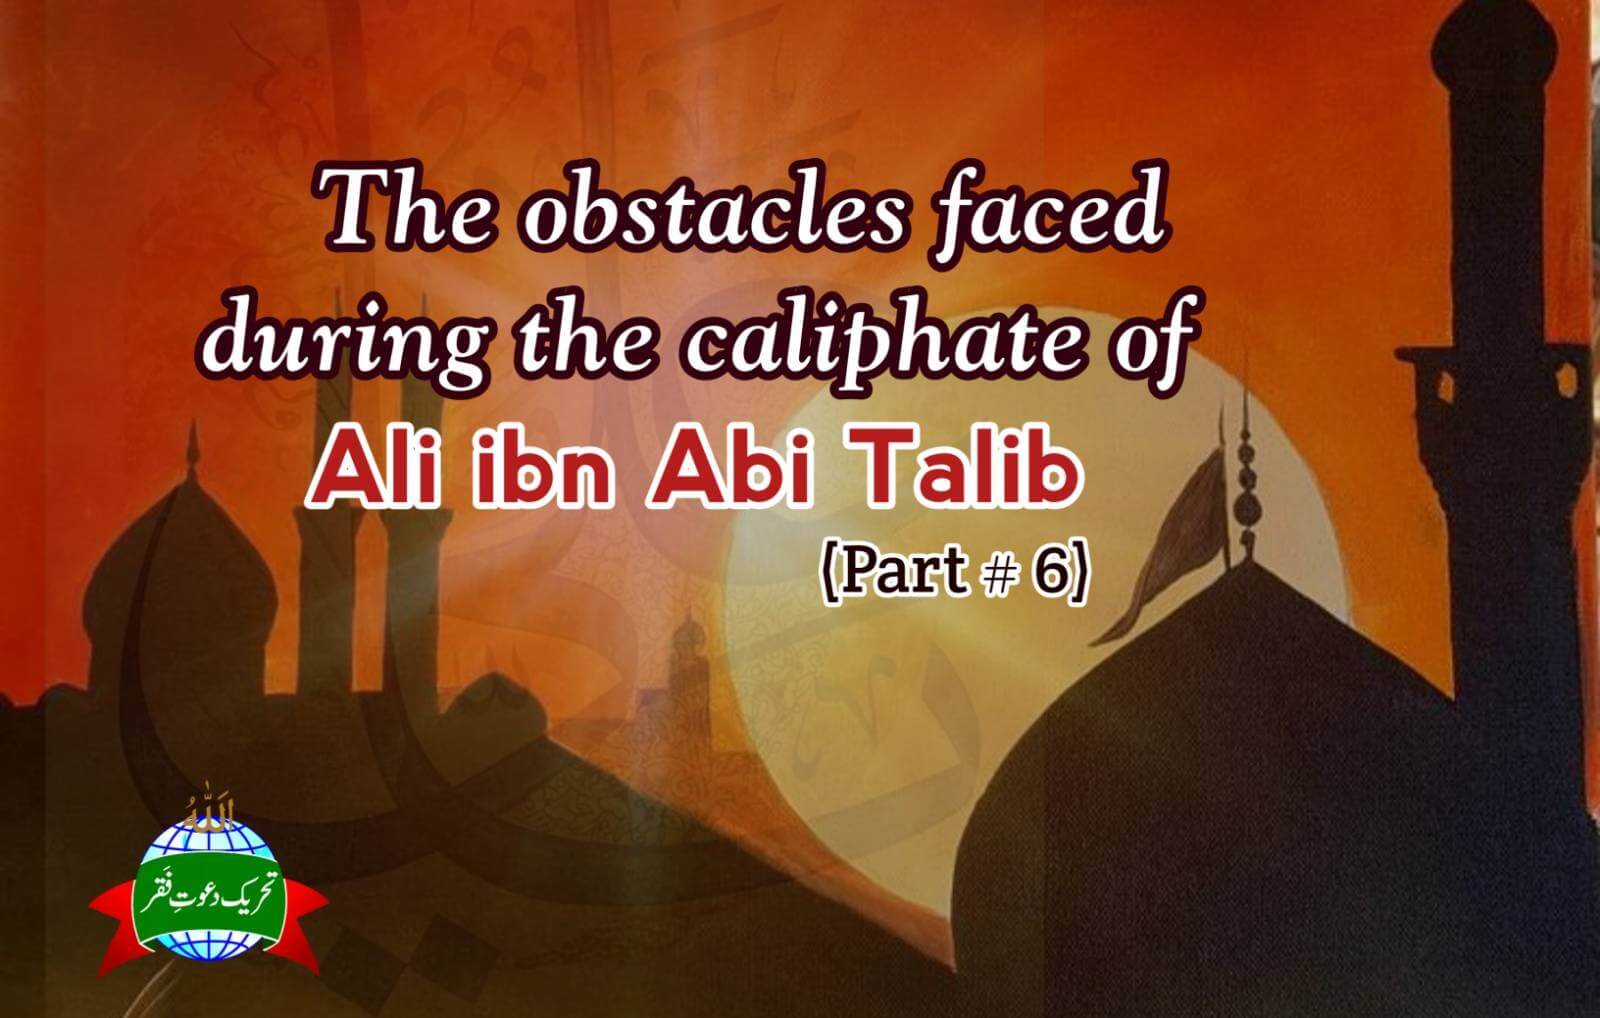 THE OBSTACLES FACED DURING THE CALIPHATE OF ALI IBN ABI TALIB<br />
